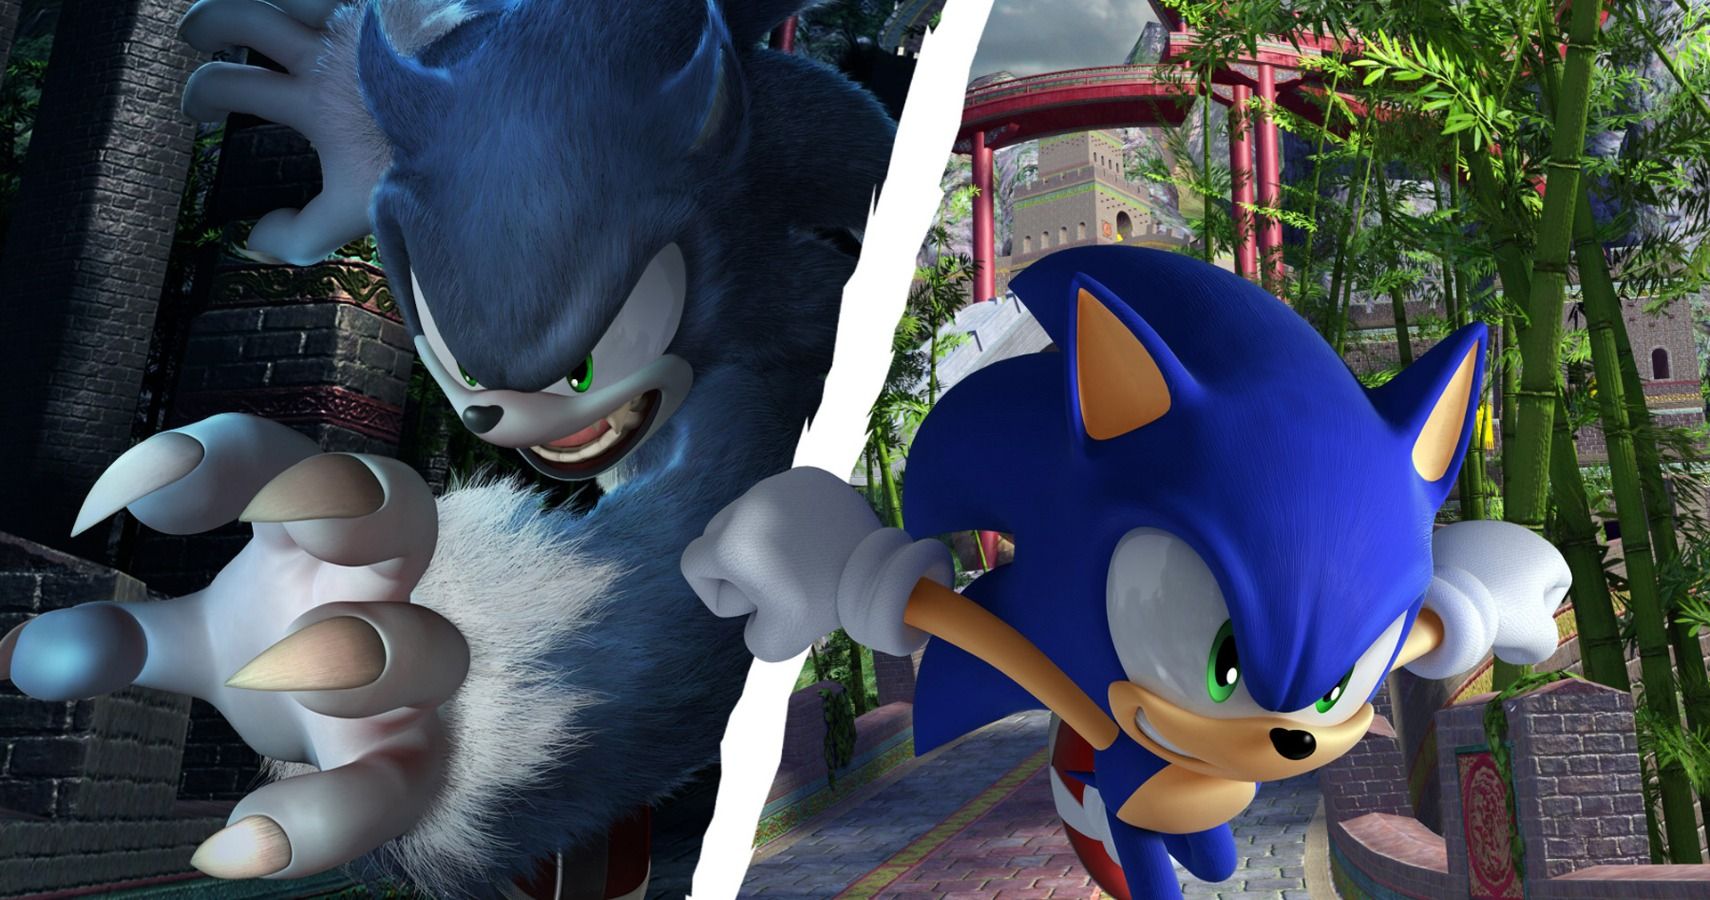 sonic unleashed ps2 release date